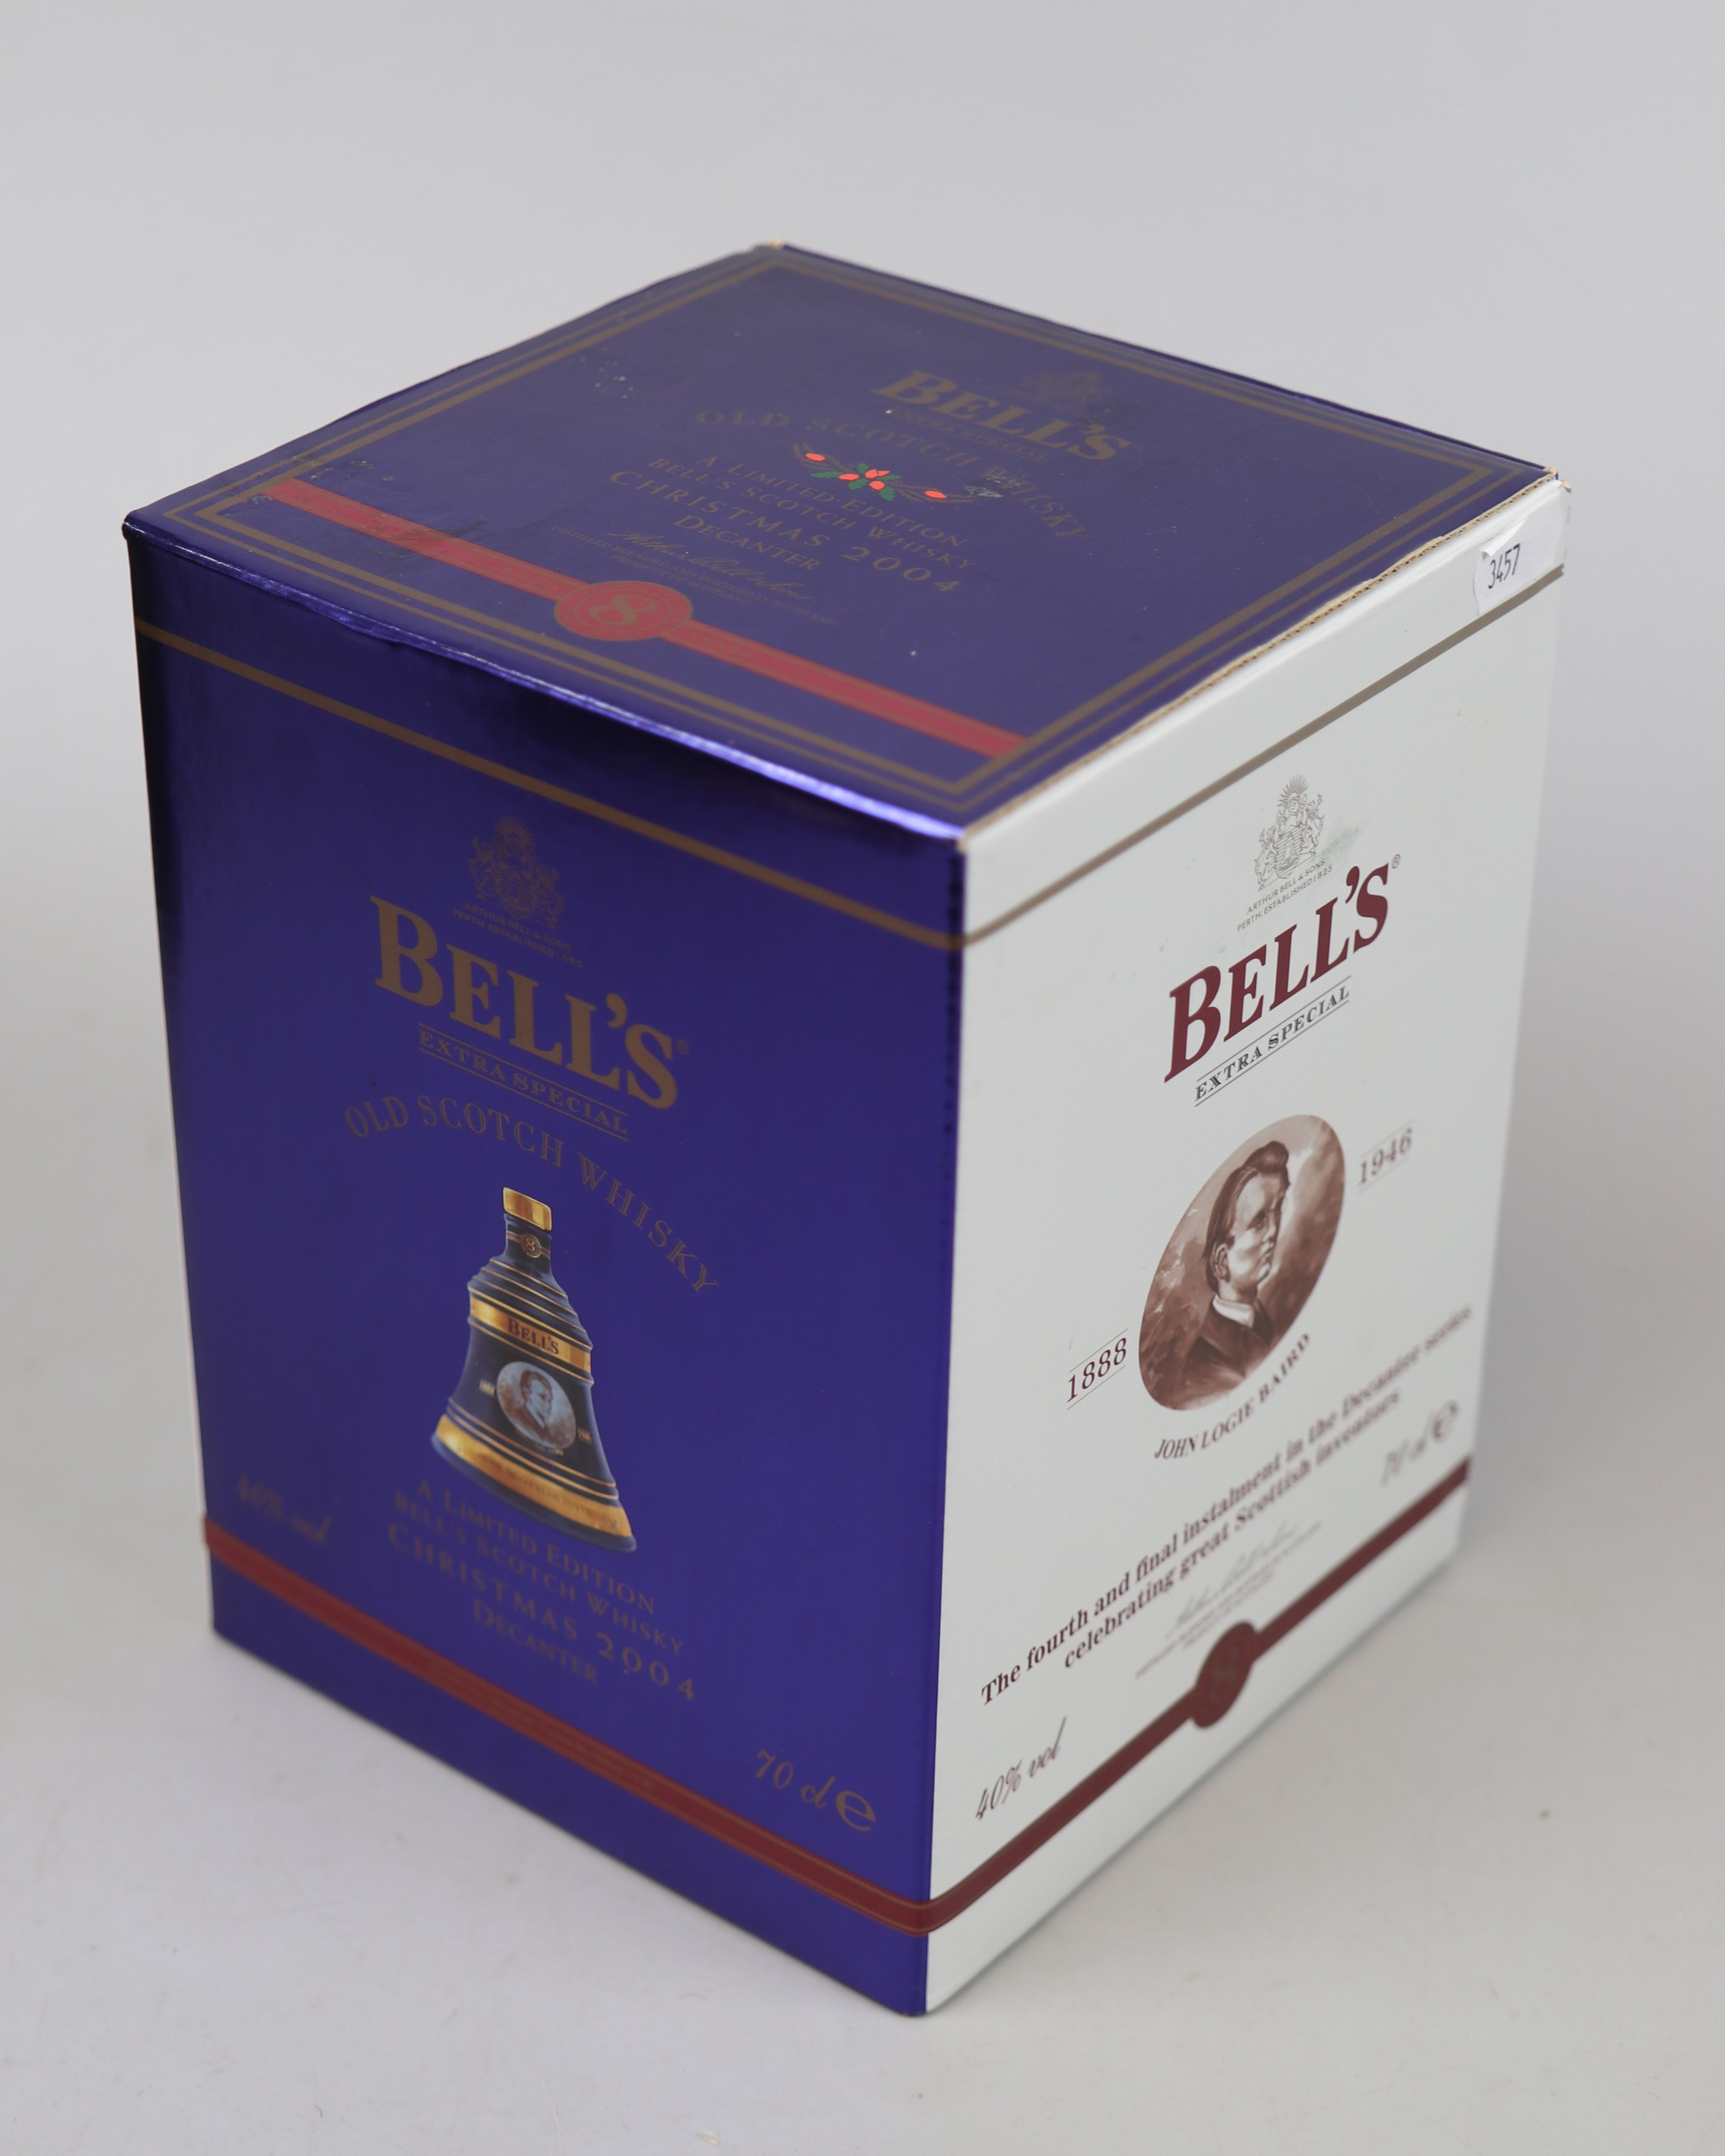 2 Bells whiskey decanters - Full & sealed in original boxes - Image 9 of 9